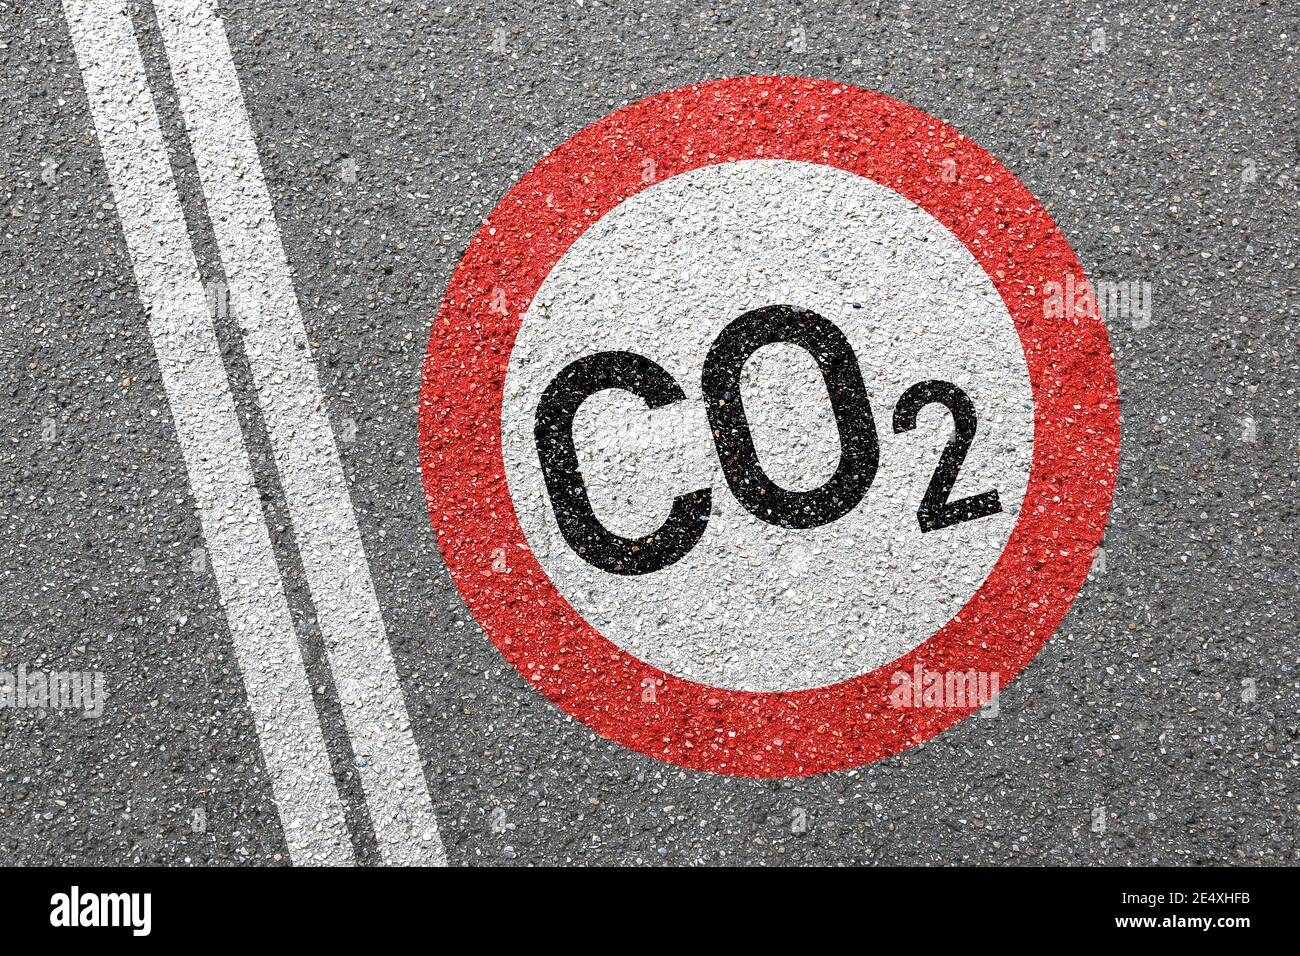 CO2 emissions car emission Carbon dioxide air pollution reduction driving ban zone concept Stock Photo